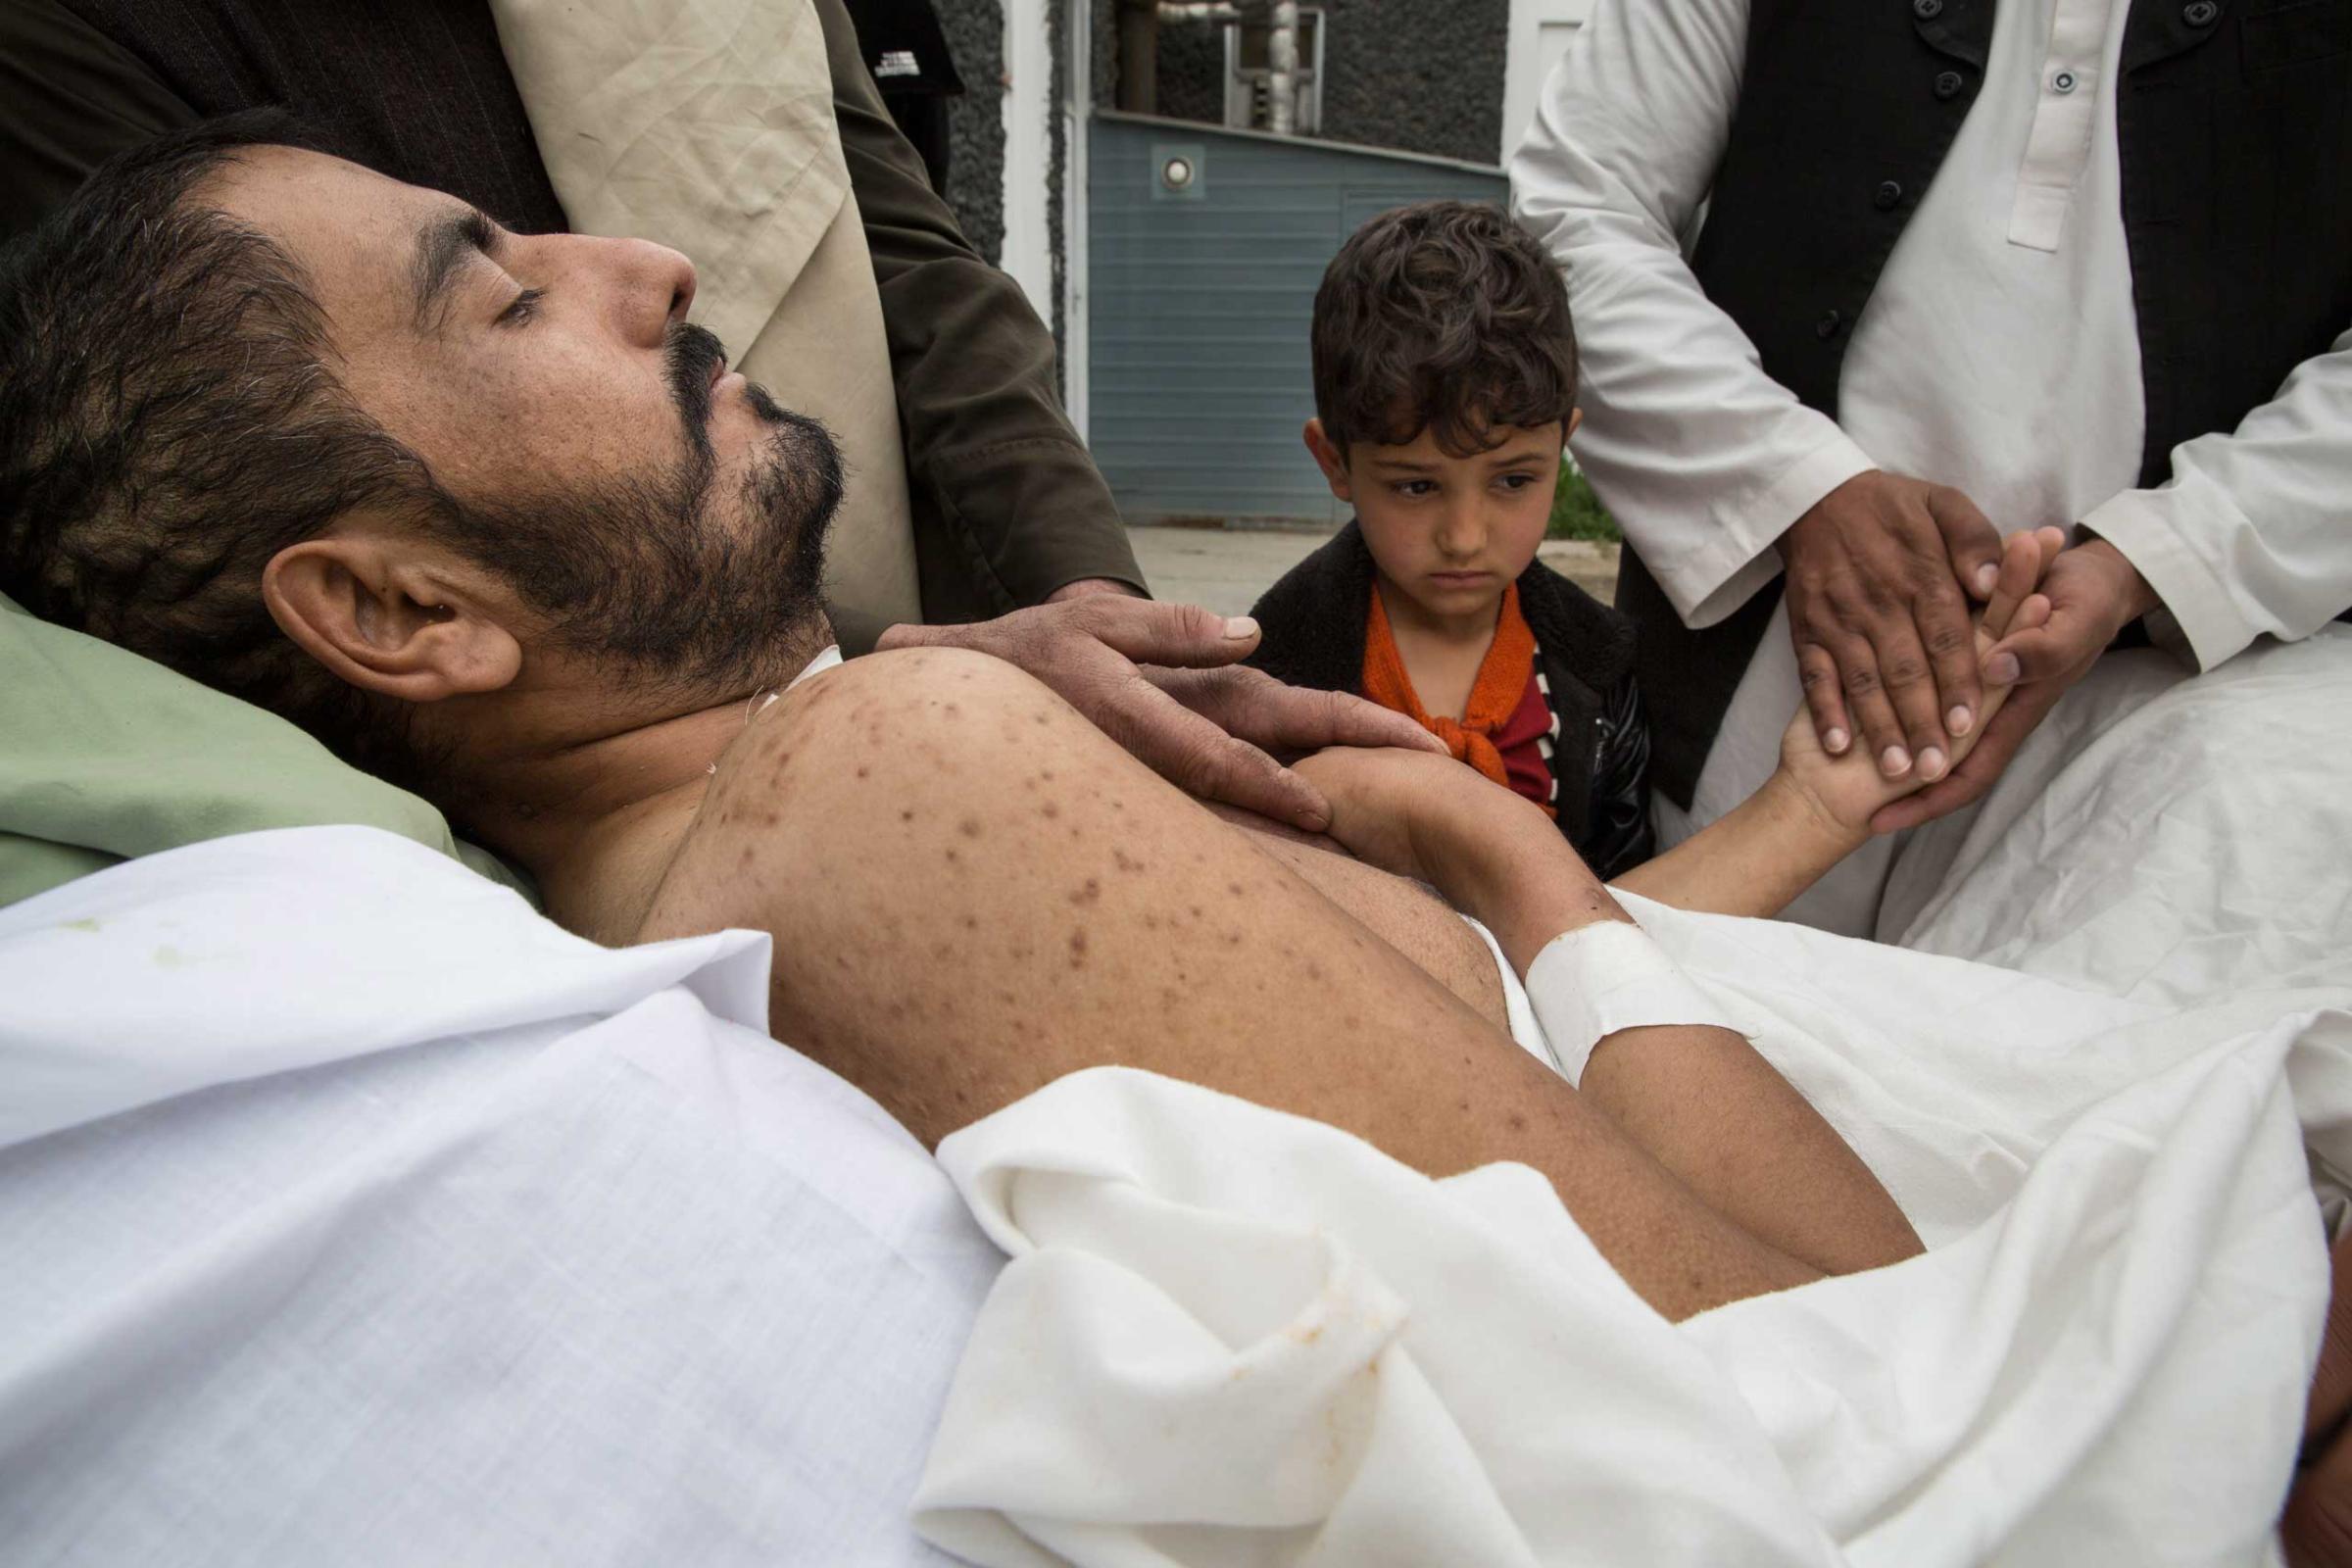 Khair Mohammed, 35, a paraplegic, lays in bed outside his ward as friends and relatives—including his daughter, Madina, 6—visit him at the emergency hospital in Kabul on March 28, 2016. Mohammed had barely escaped death after taking 3 bullets to his abdomen and skull.